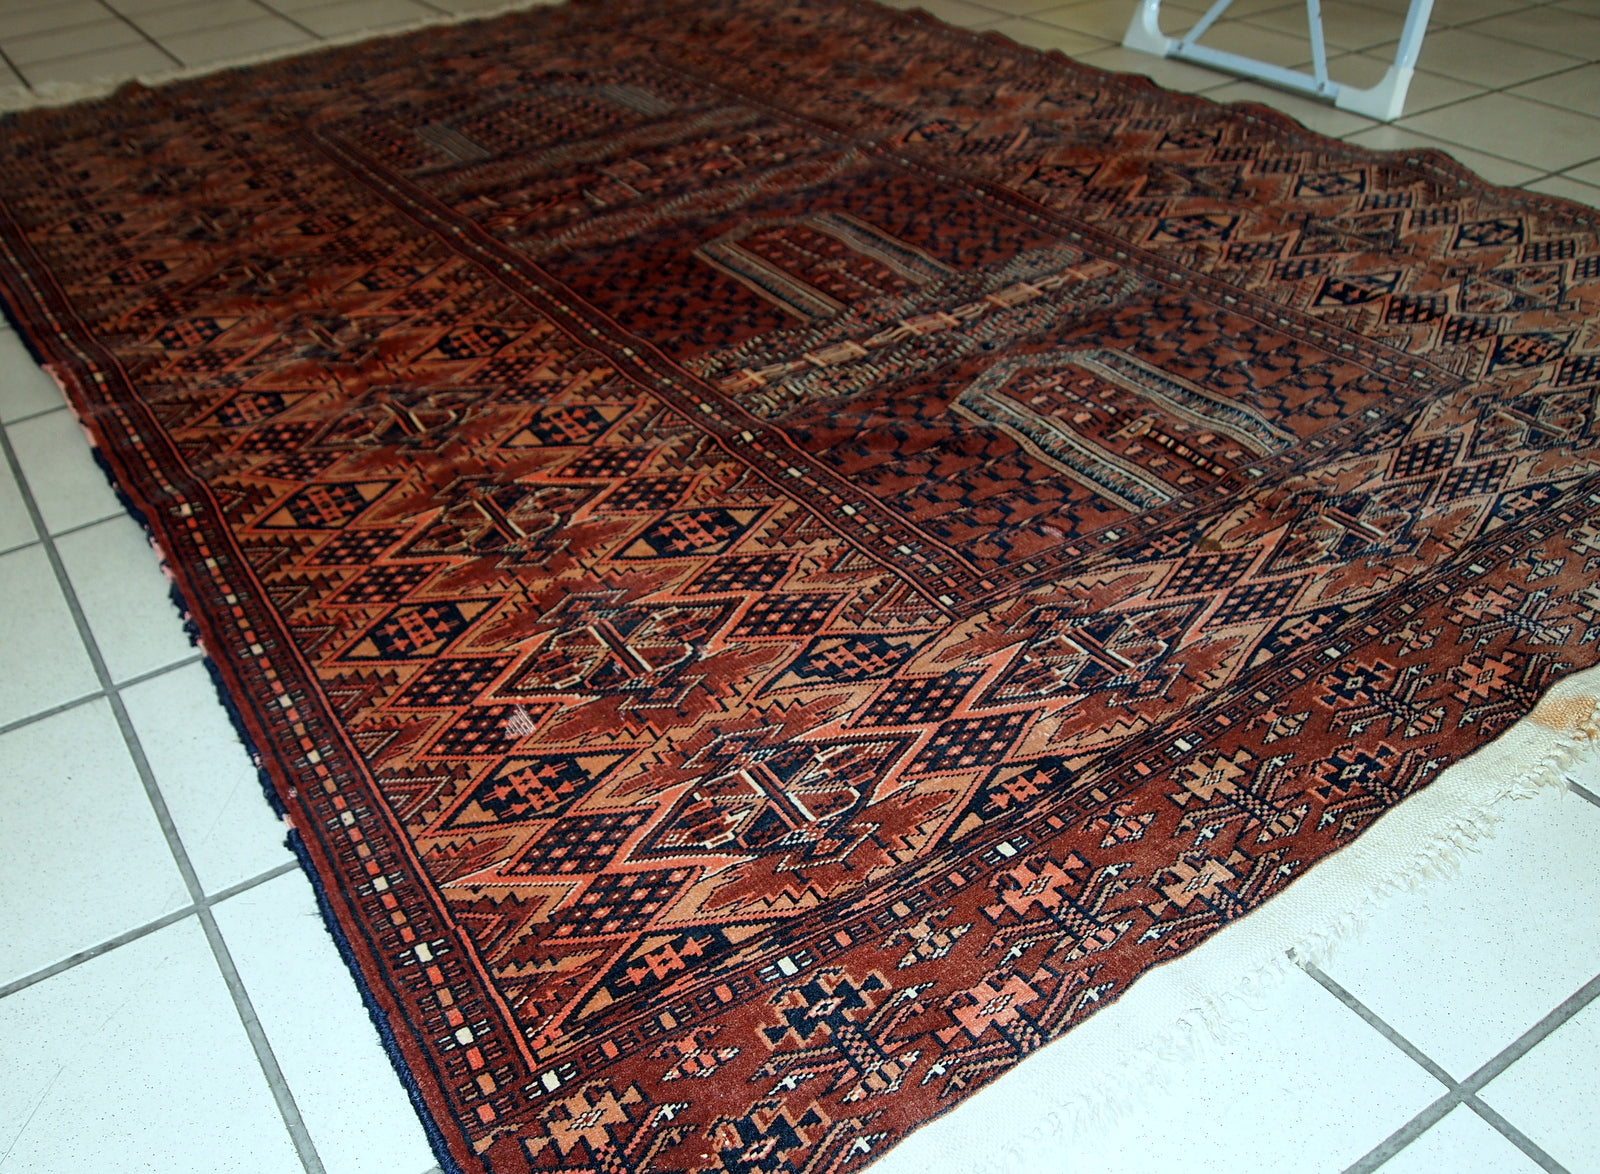 Semi-antique Turkmen Hachli prayer handmade rug in original good condition. The rug has fine weave and it is very thin.  The rug is in burgundy, pink, navy blue and white shades.